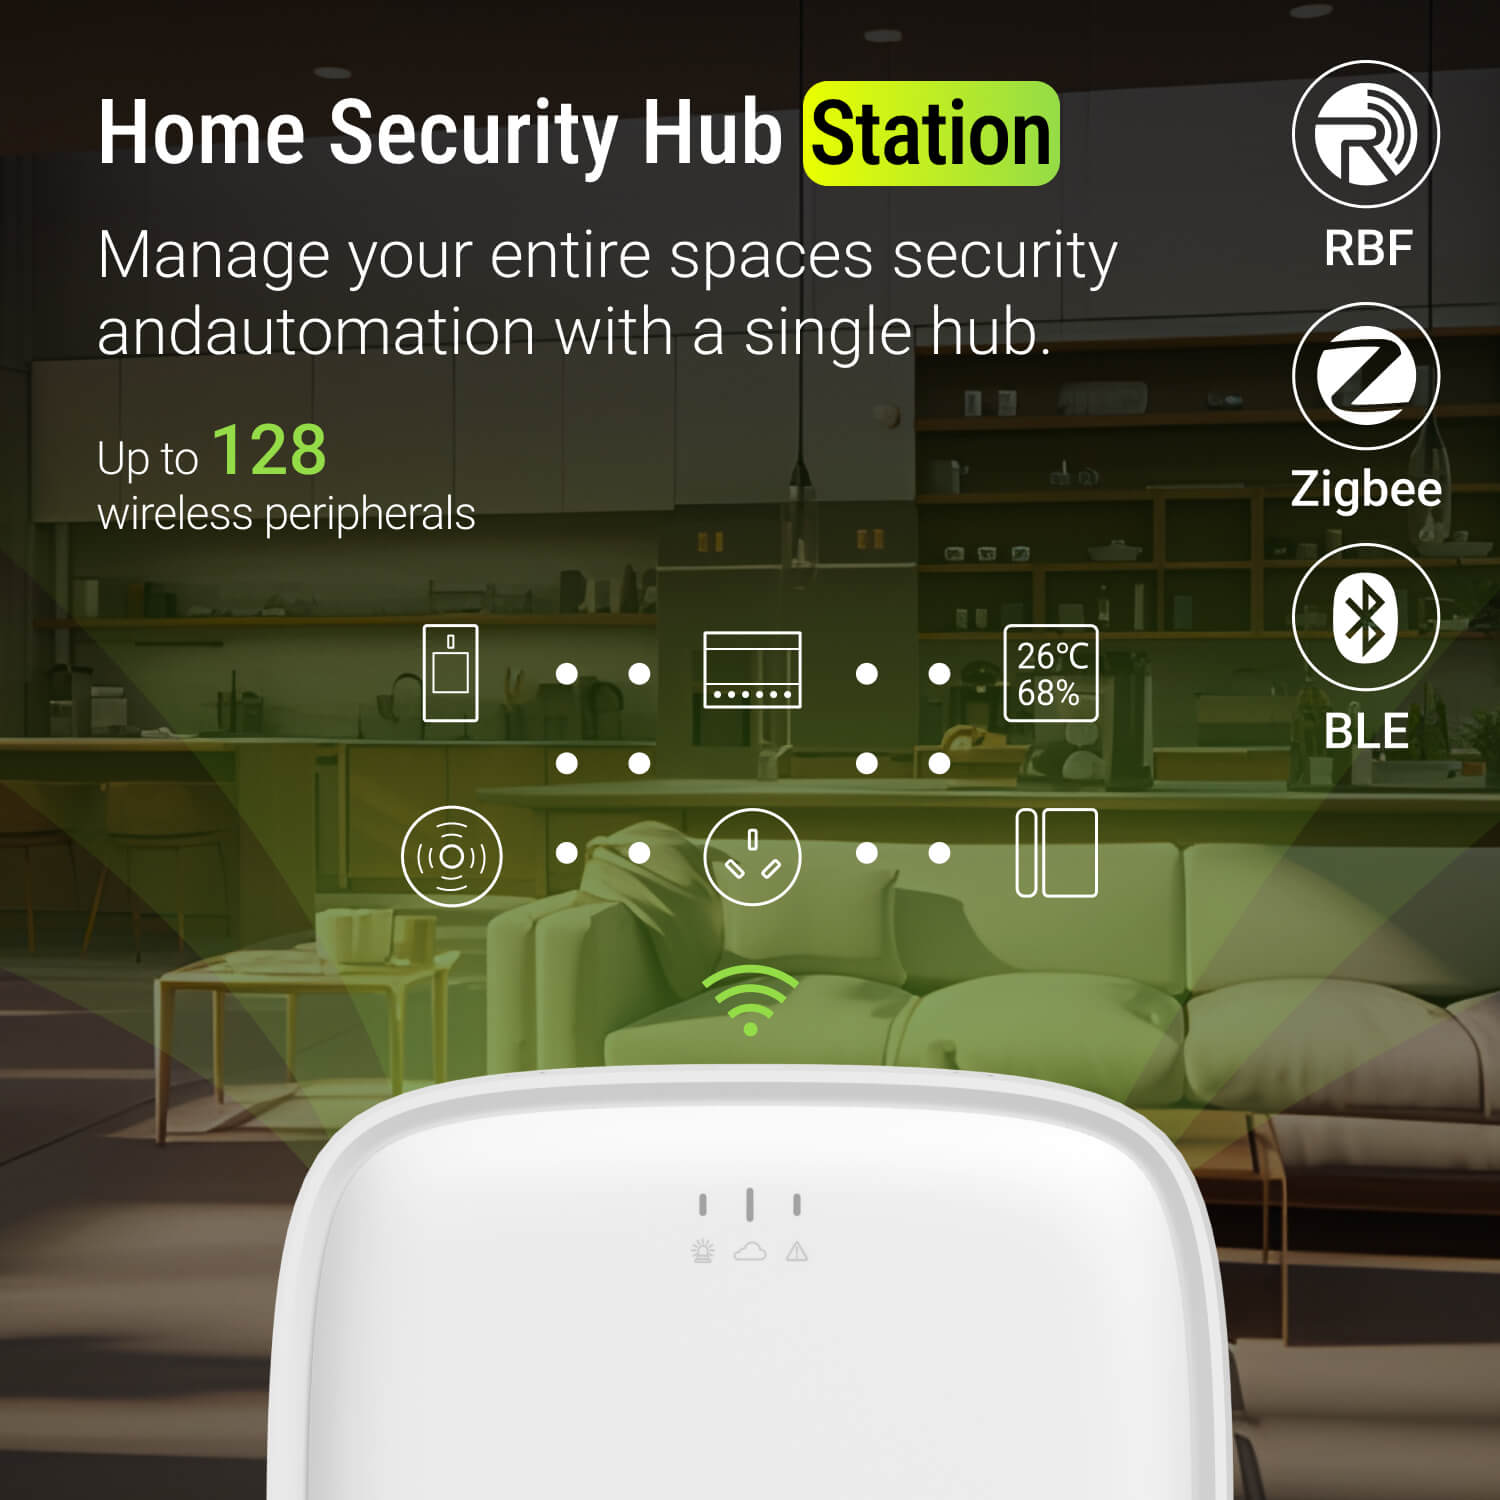 Home Security Hub Station - Advanced Smart Automation System with Extended Range Wireless, LTE, and Zigbee Connectivity - Supports 128 Devices